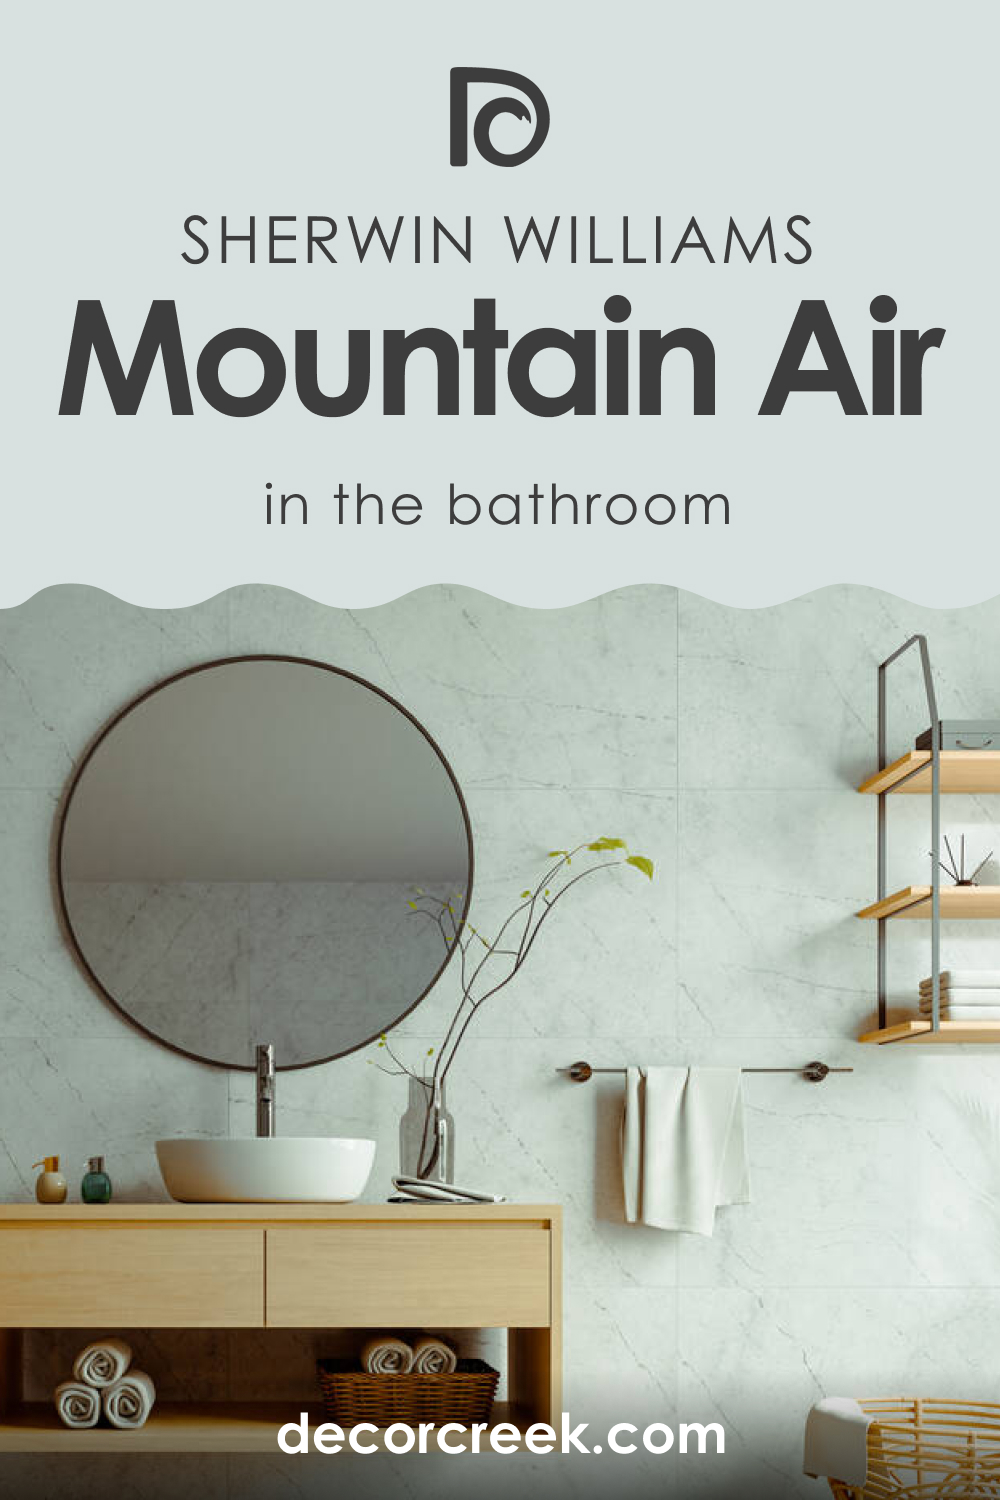 SW Mountain Air for the Bathroom by Sherwin Williams